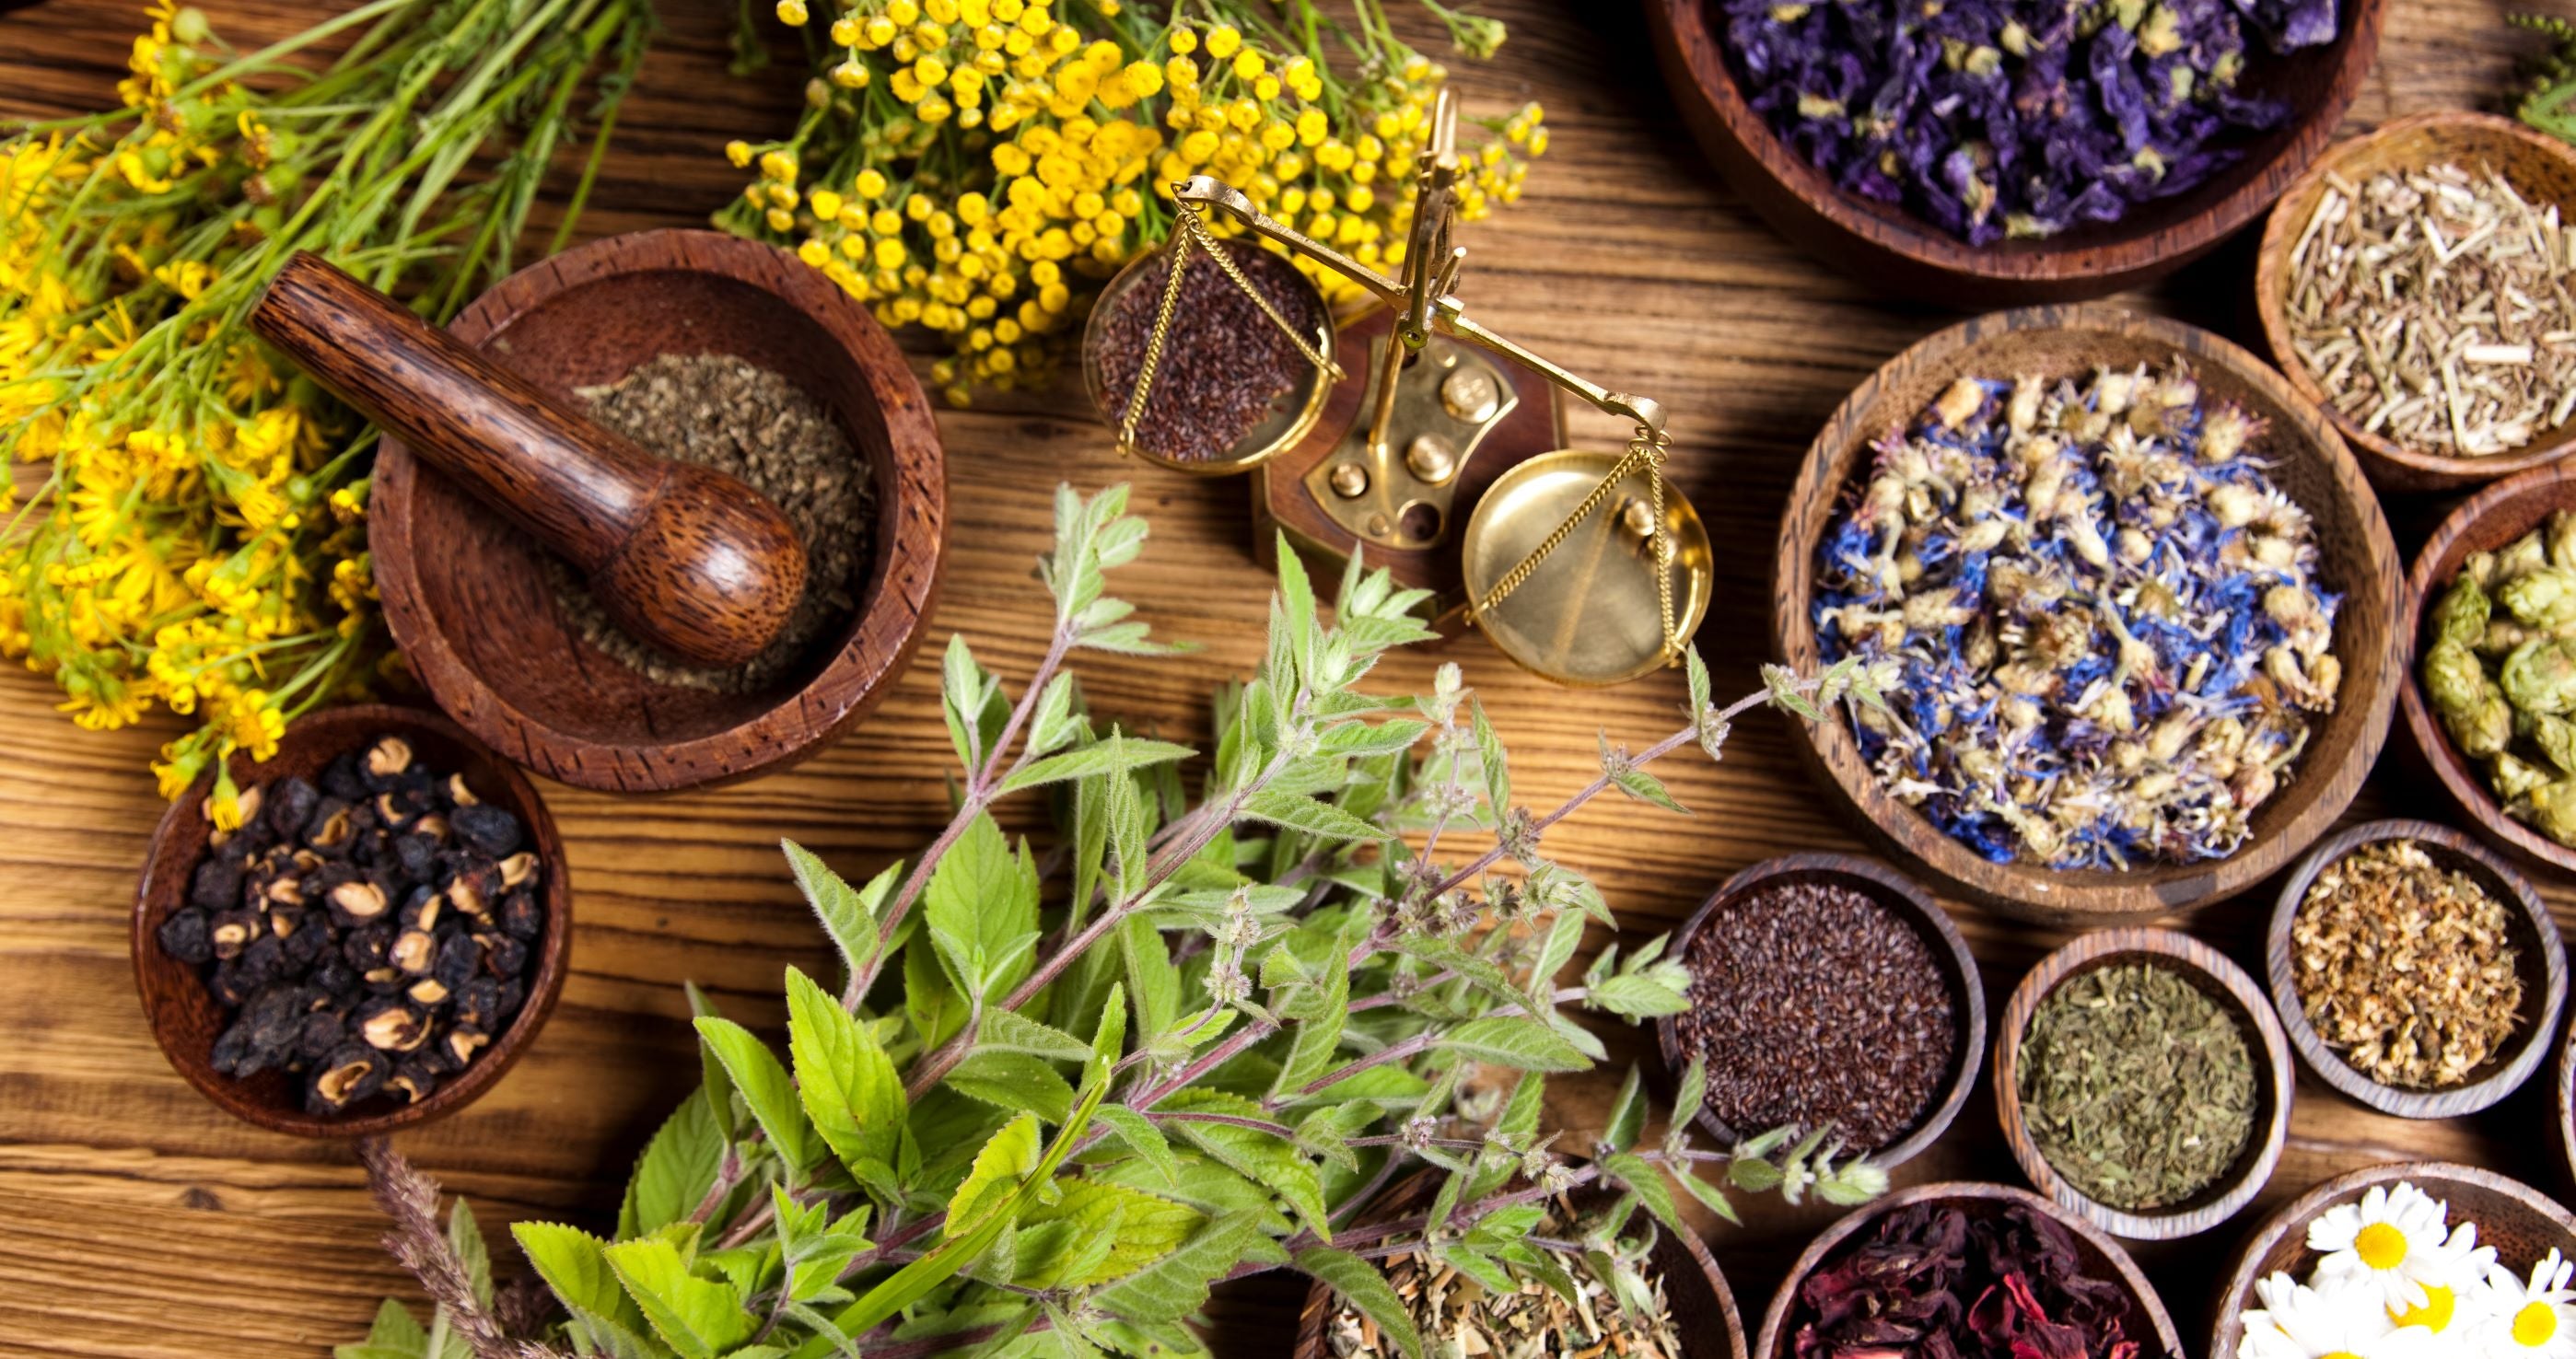 Unlock the Power of Nature with DIY Herbal Bath Recipes